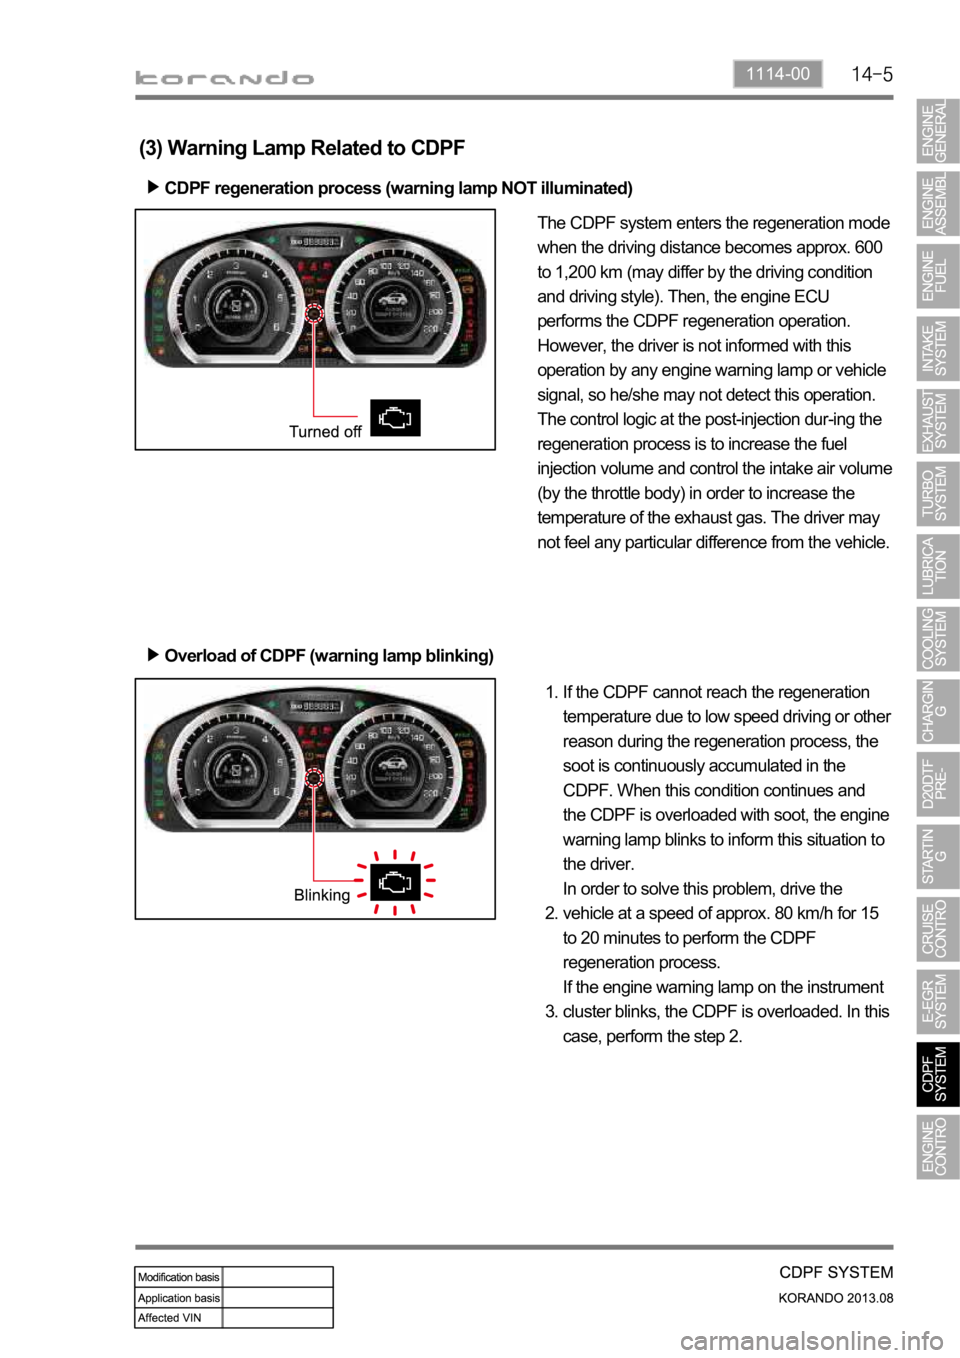 SSANGYONG KORANDO 2013  Service Manual 1114-00
(3) Warning Lamp Related to CDPF
CDPF regeneration process (warning lamp NOT illuminated)
Overload of CDPF (warning lamp blinking)
The CDPF system enters the regeneration mode 
when the drivin